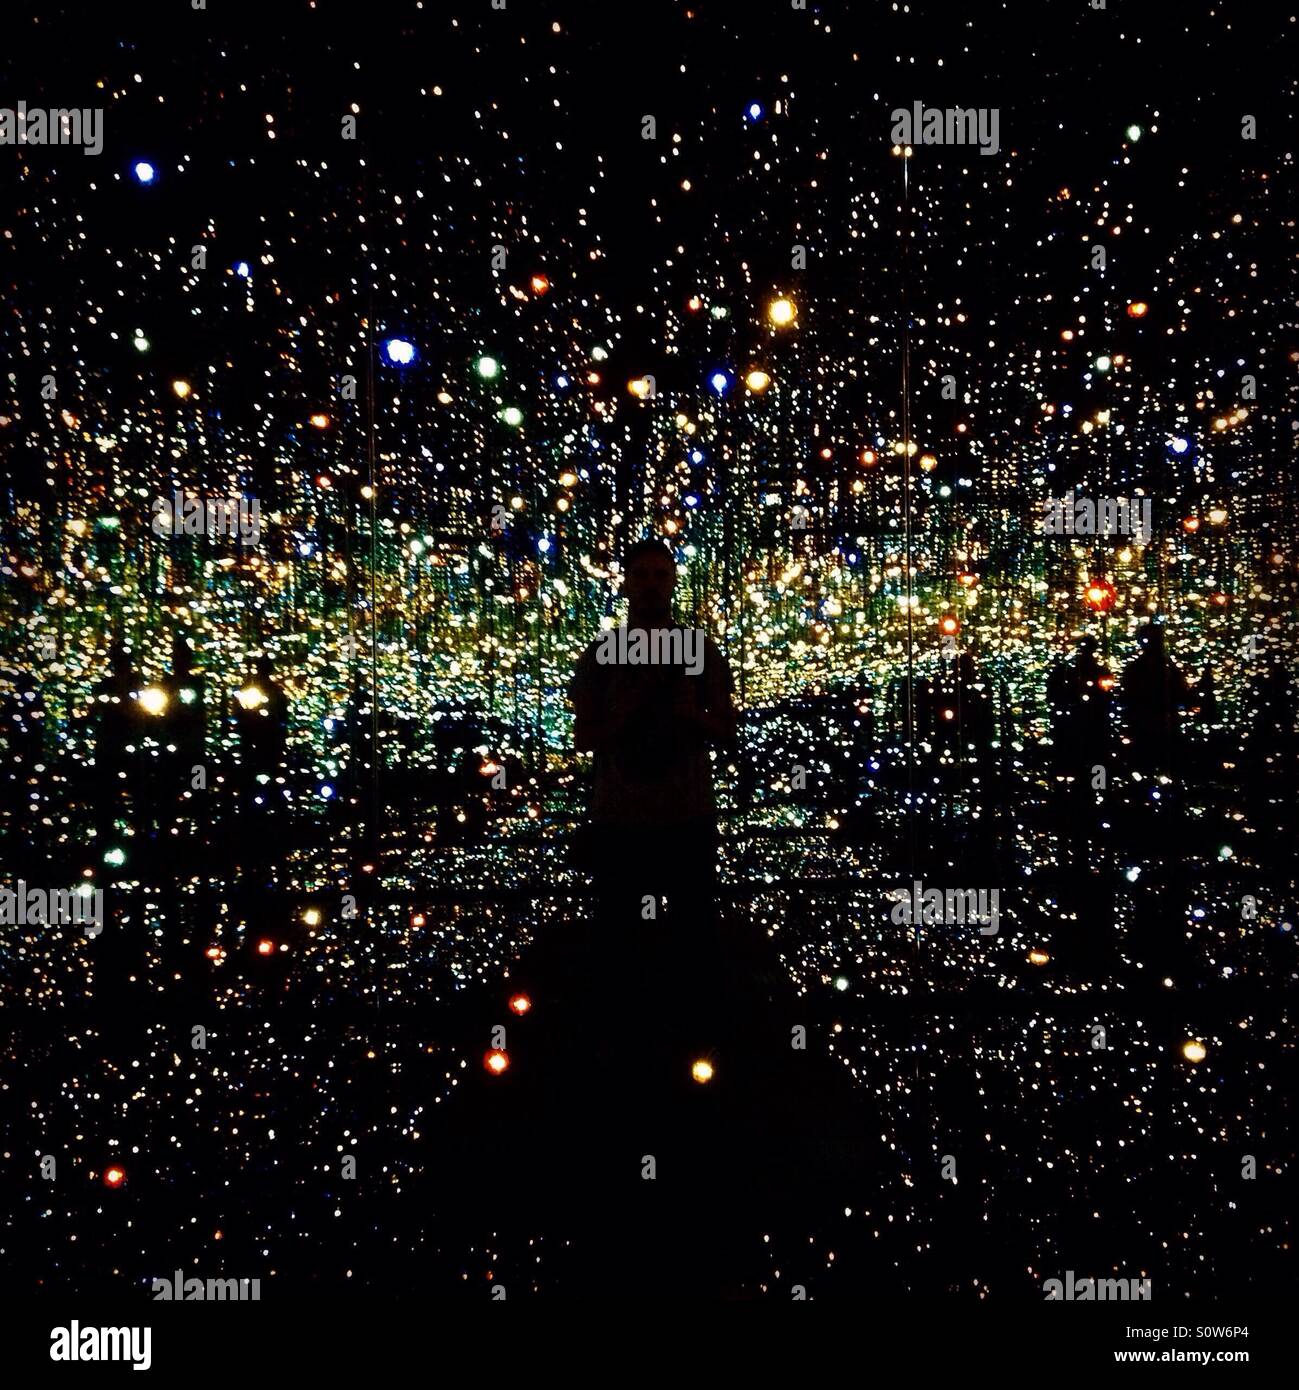 The Souls of Millions of Light Years Away - Inside of the Infinity Mirrored Room. Stock Photo